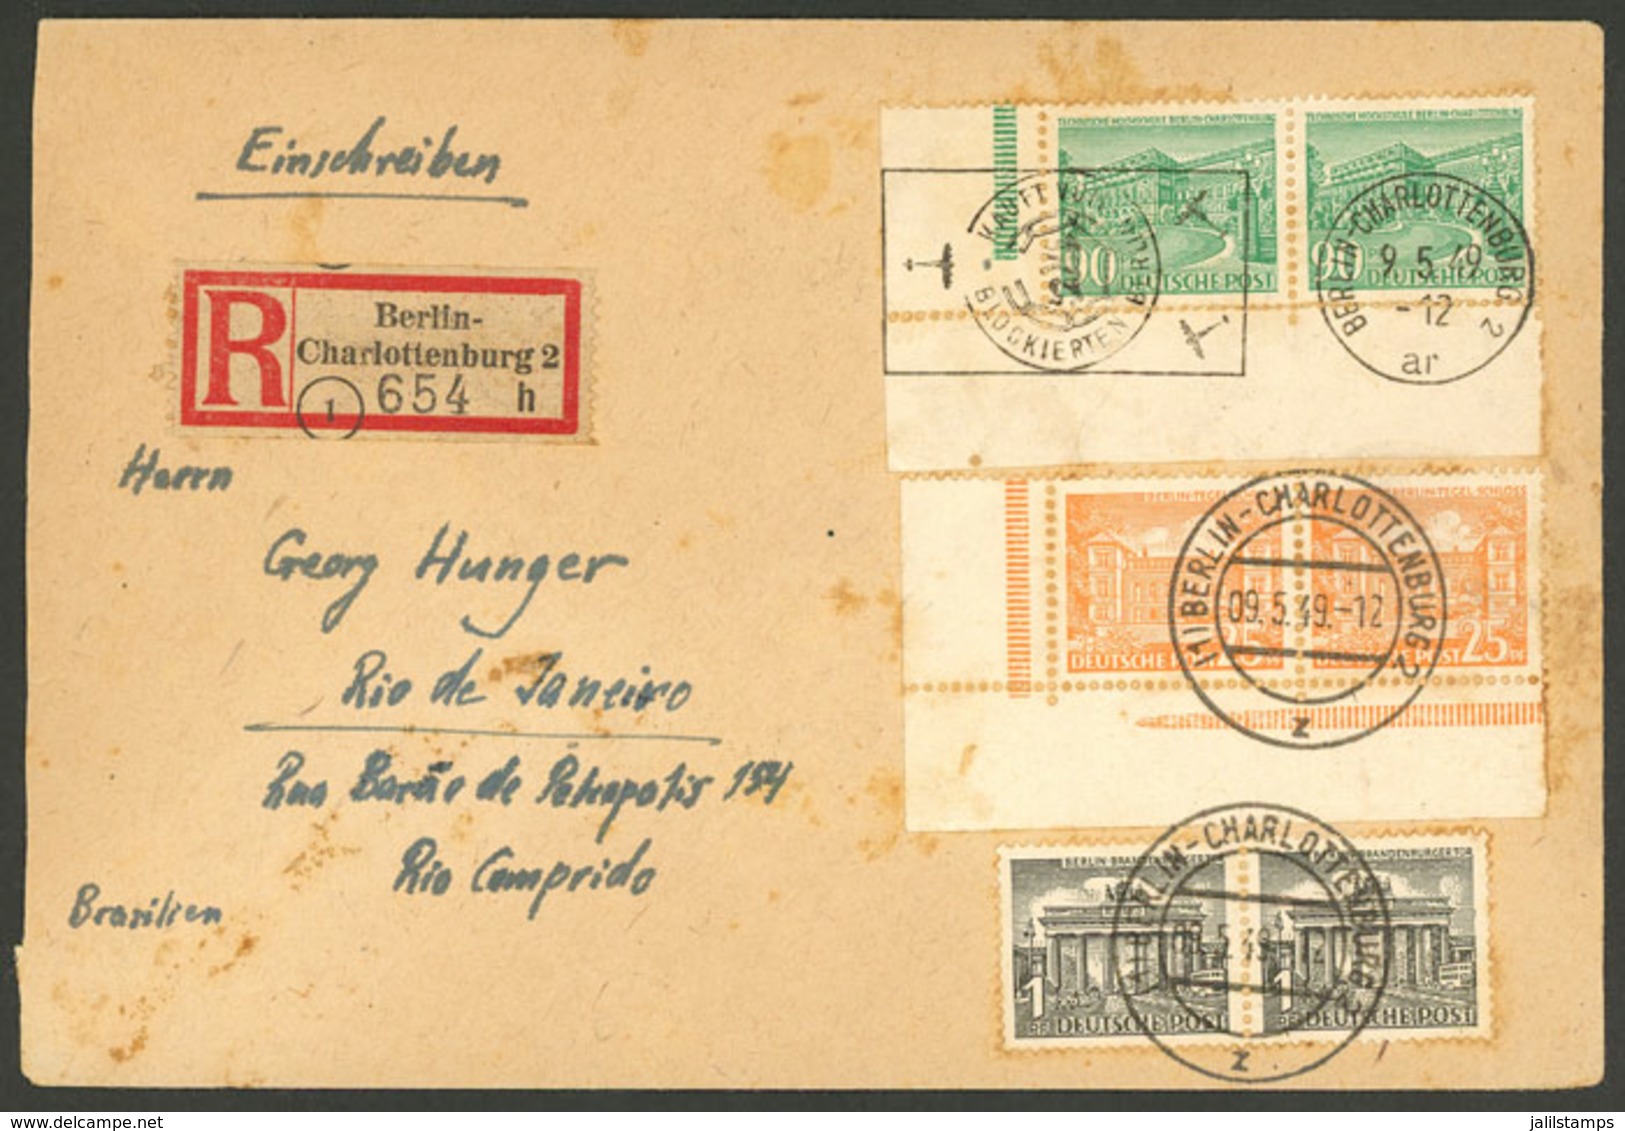 GERMANY - BERLIN: Registered Cover Sent To Brazil On 9/MAY/1949 With Nice Postage, Some Light Staining, All The Same Att - Briefe U. Dokumente